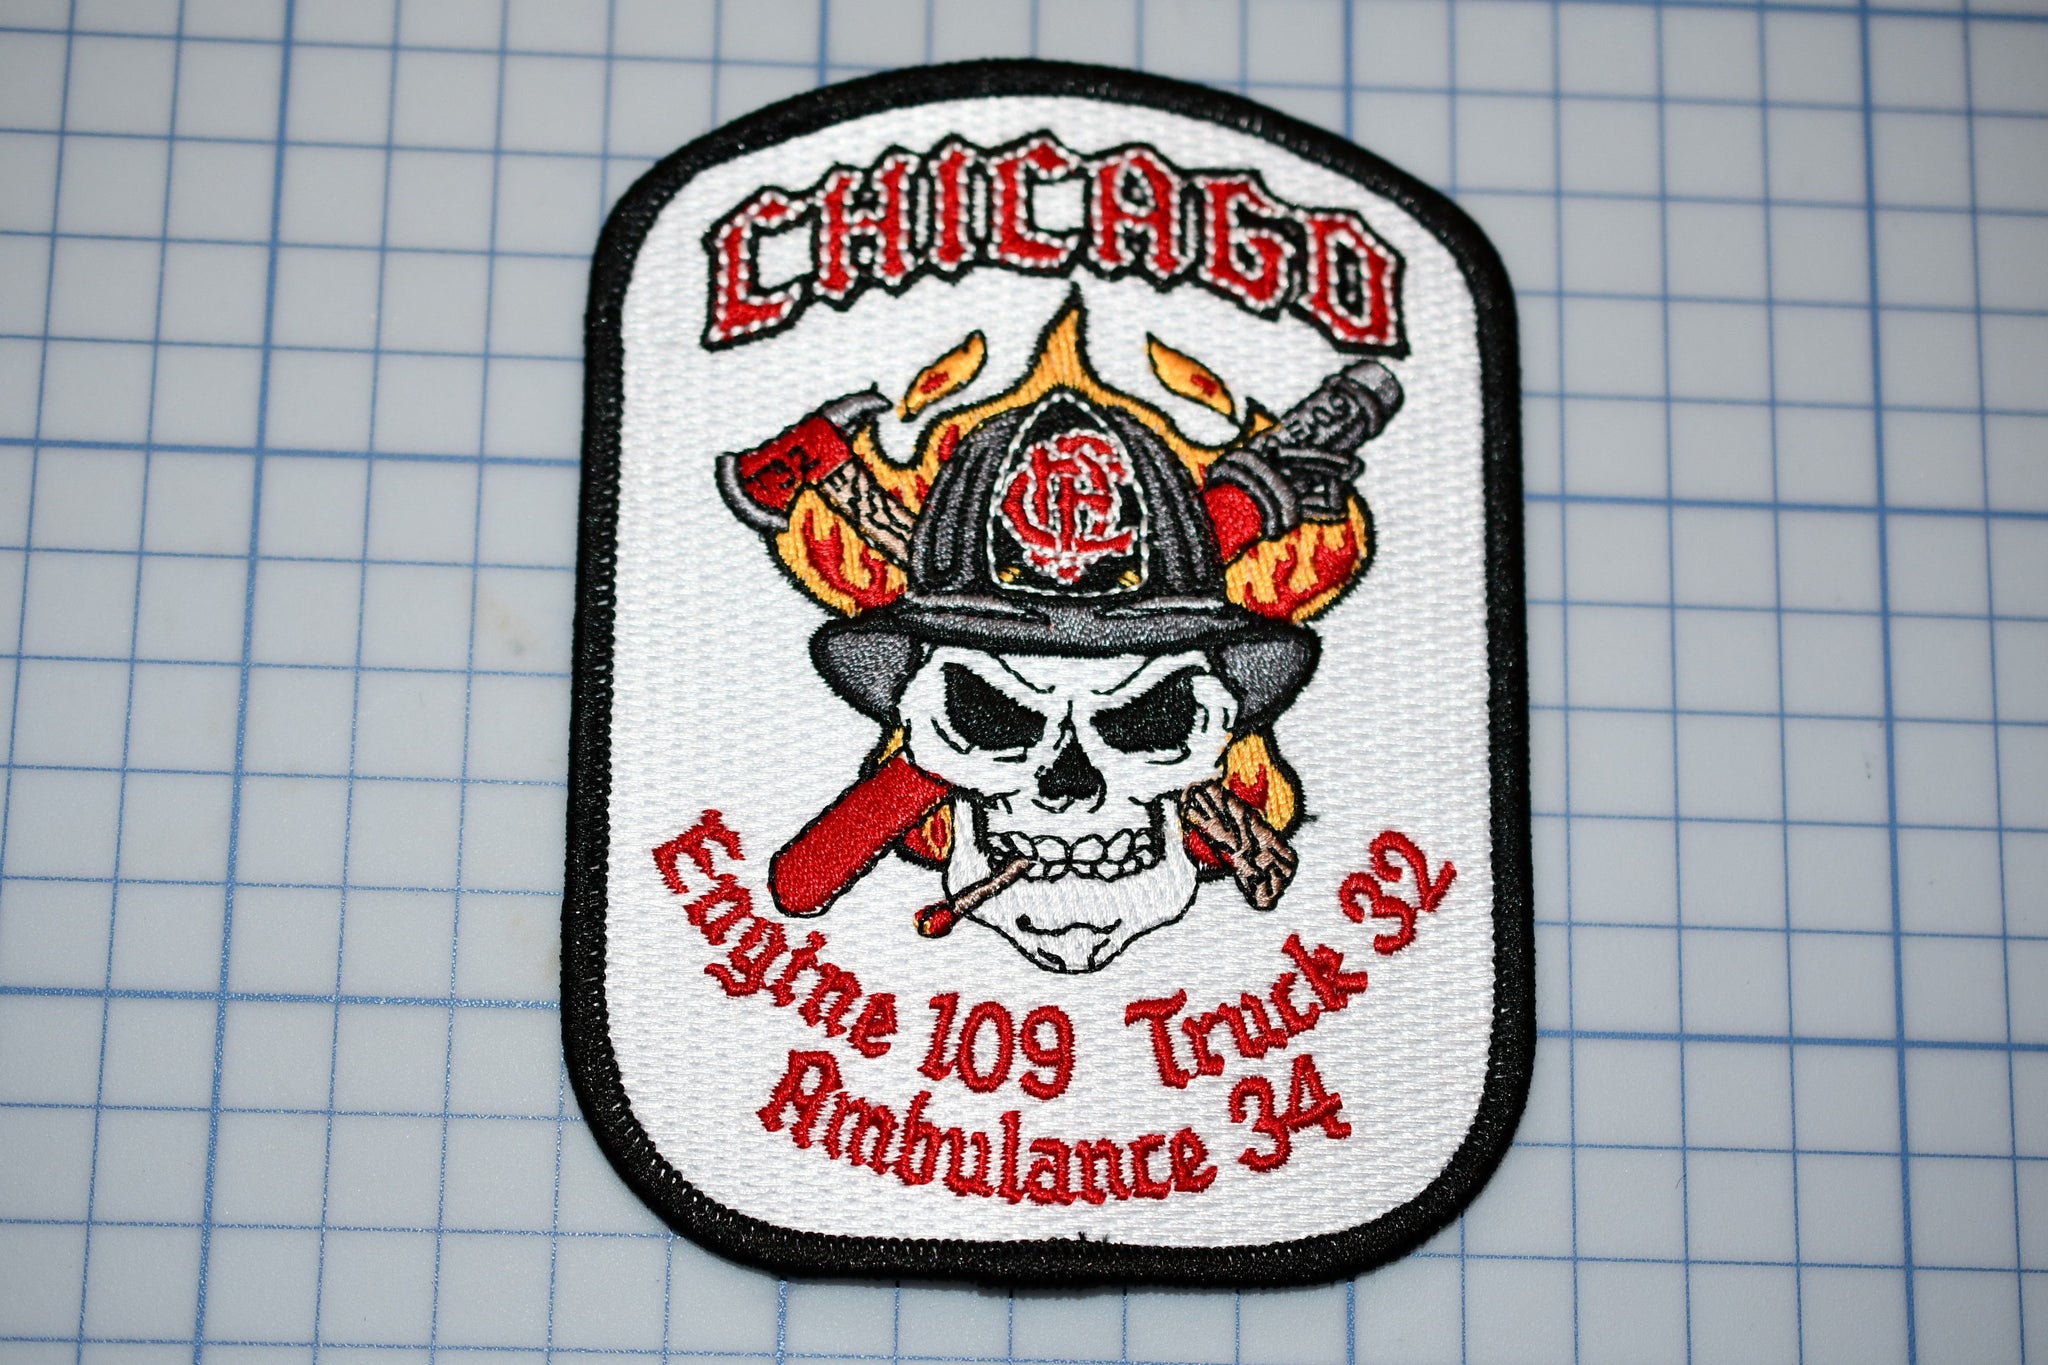 Chicago Illinois Fire Department Engine 109 Truck 32 Ambulance 34 Patch (B28-332)